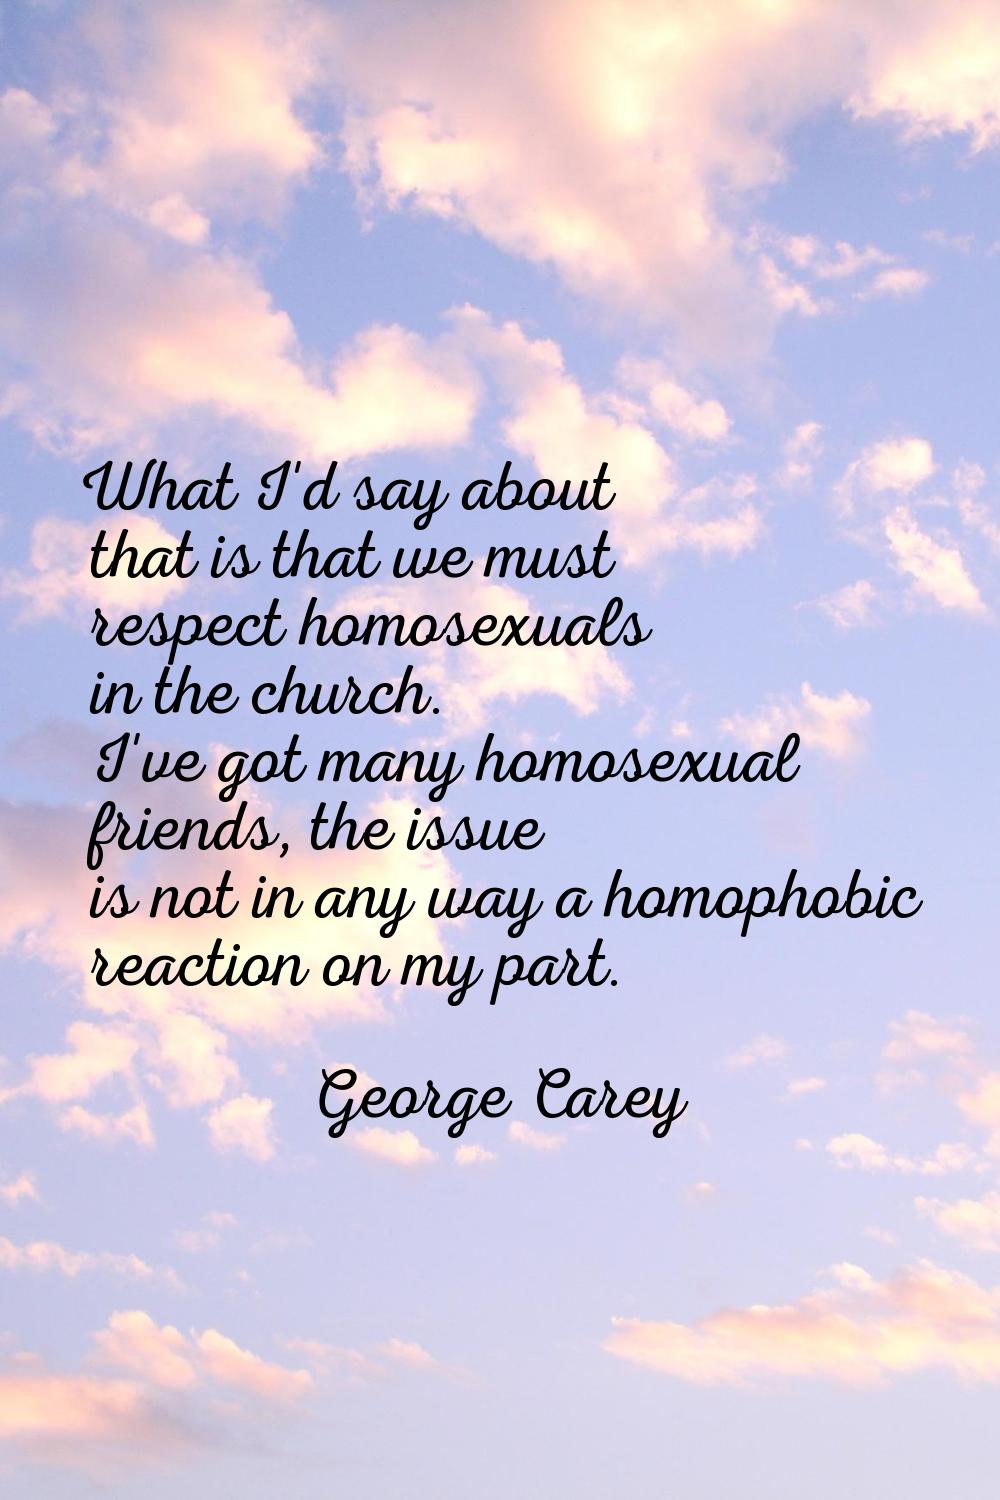 What I'd say about that is that we must respect homosexuals in the church. I've got many homosexual